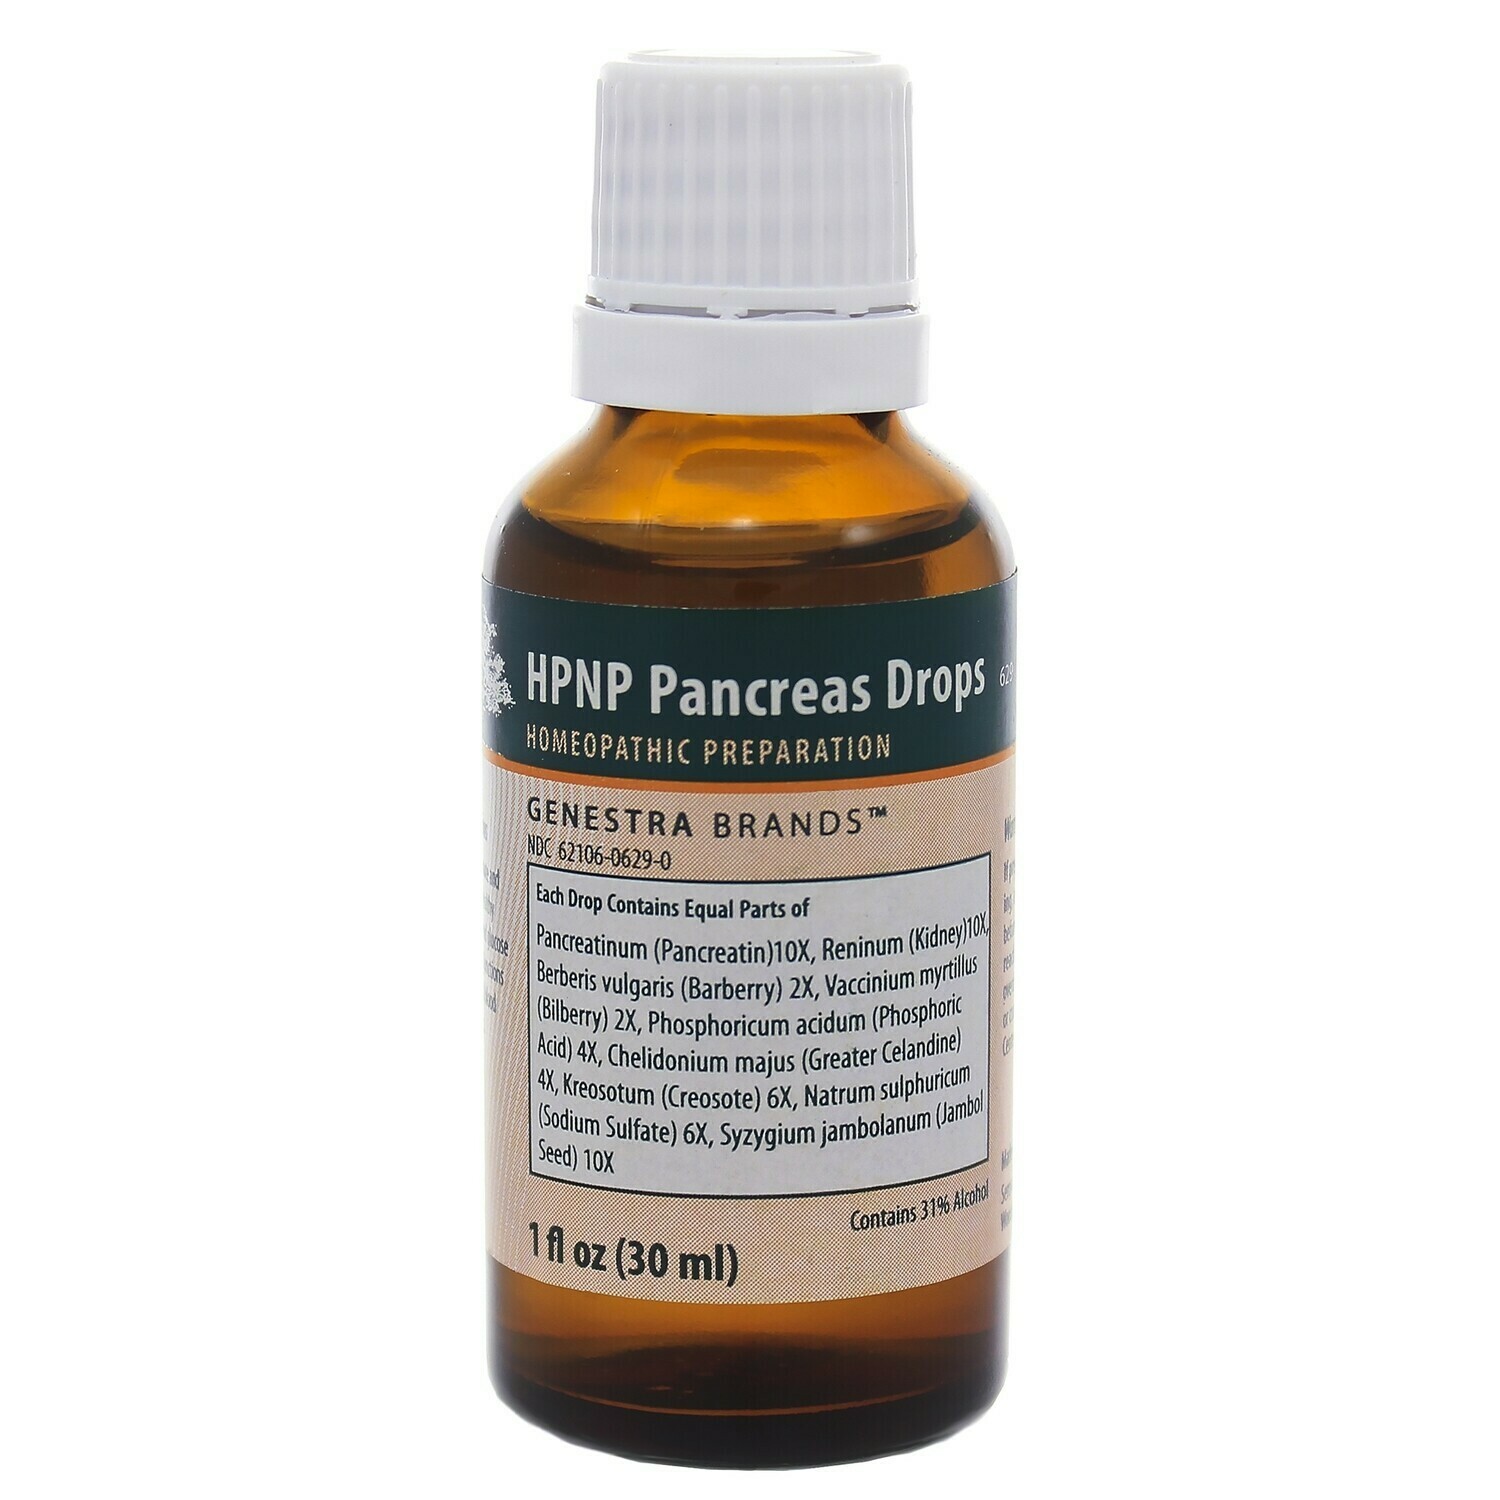 HPNP Homeopathic drops